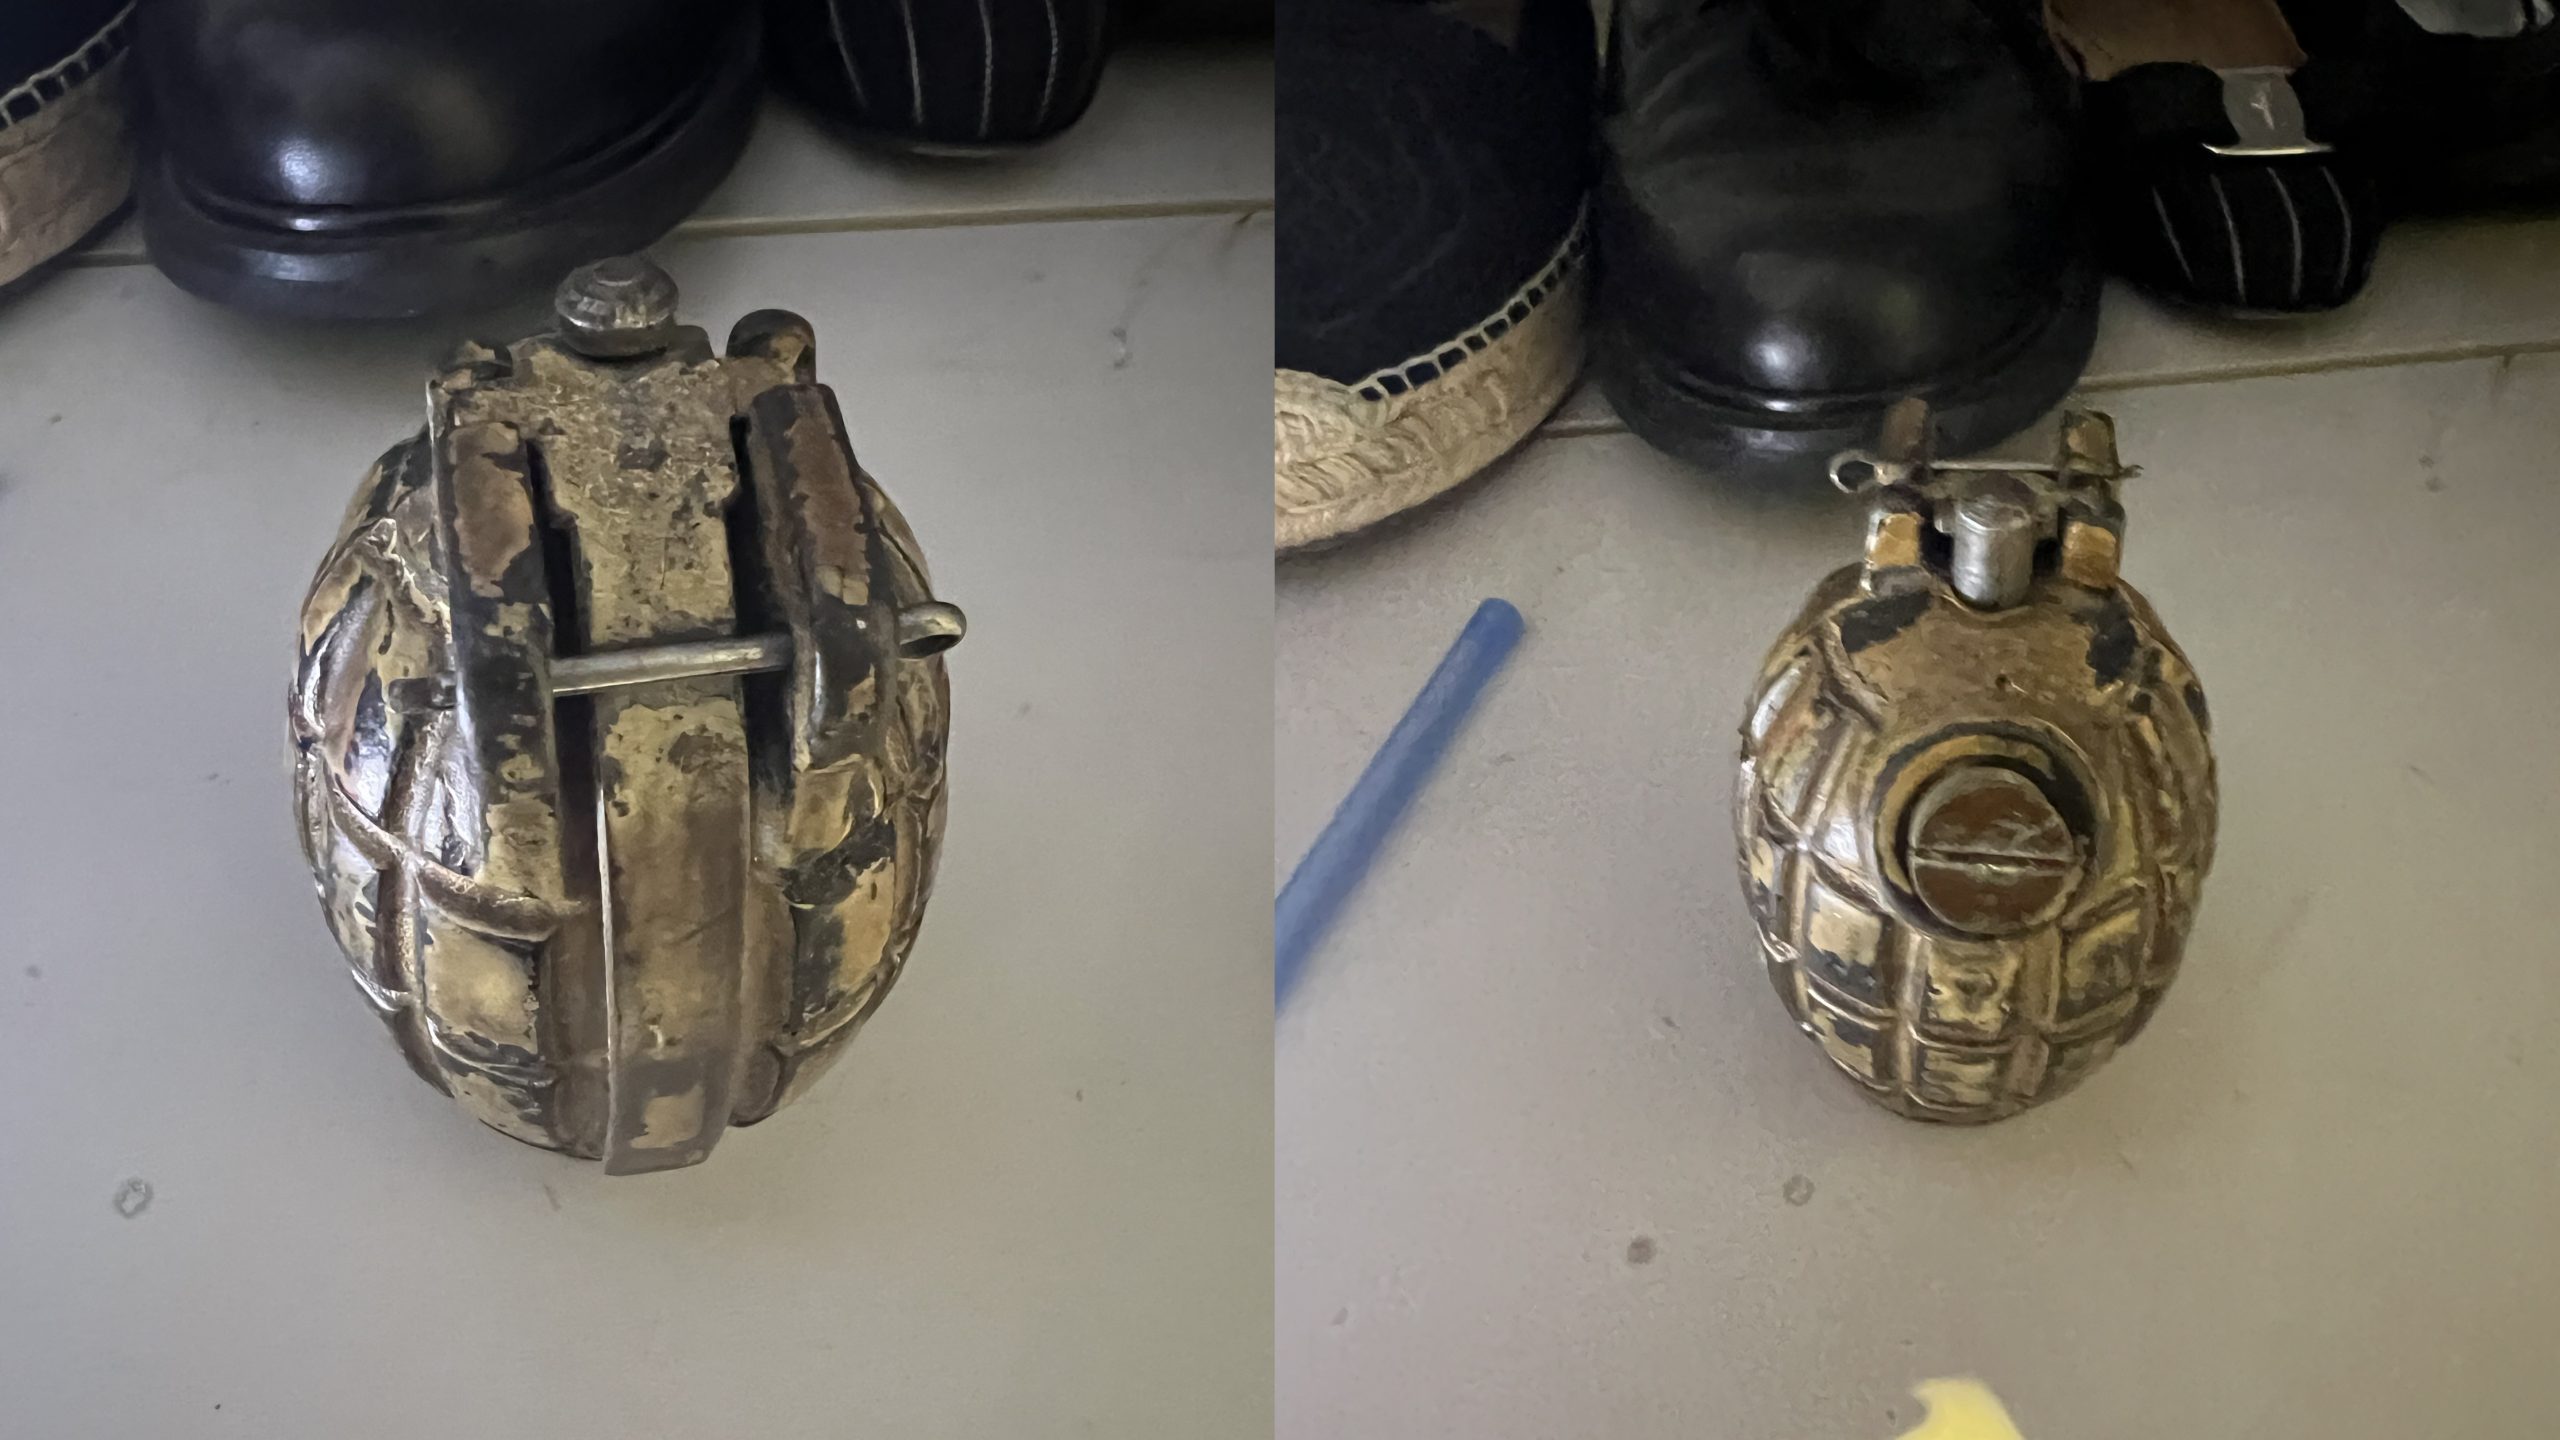 Abbotsford police respond to grenade call at thrift store